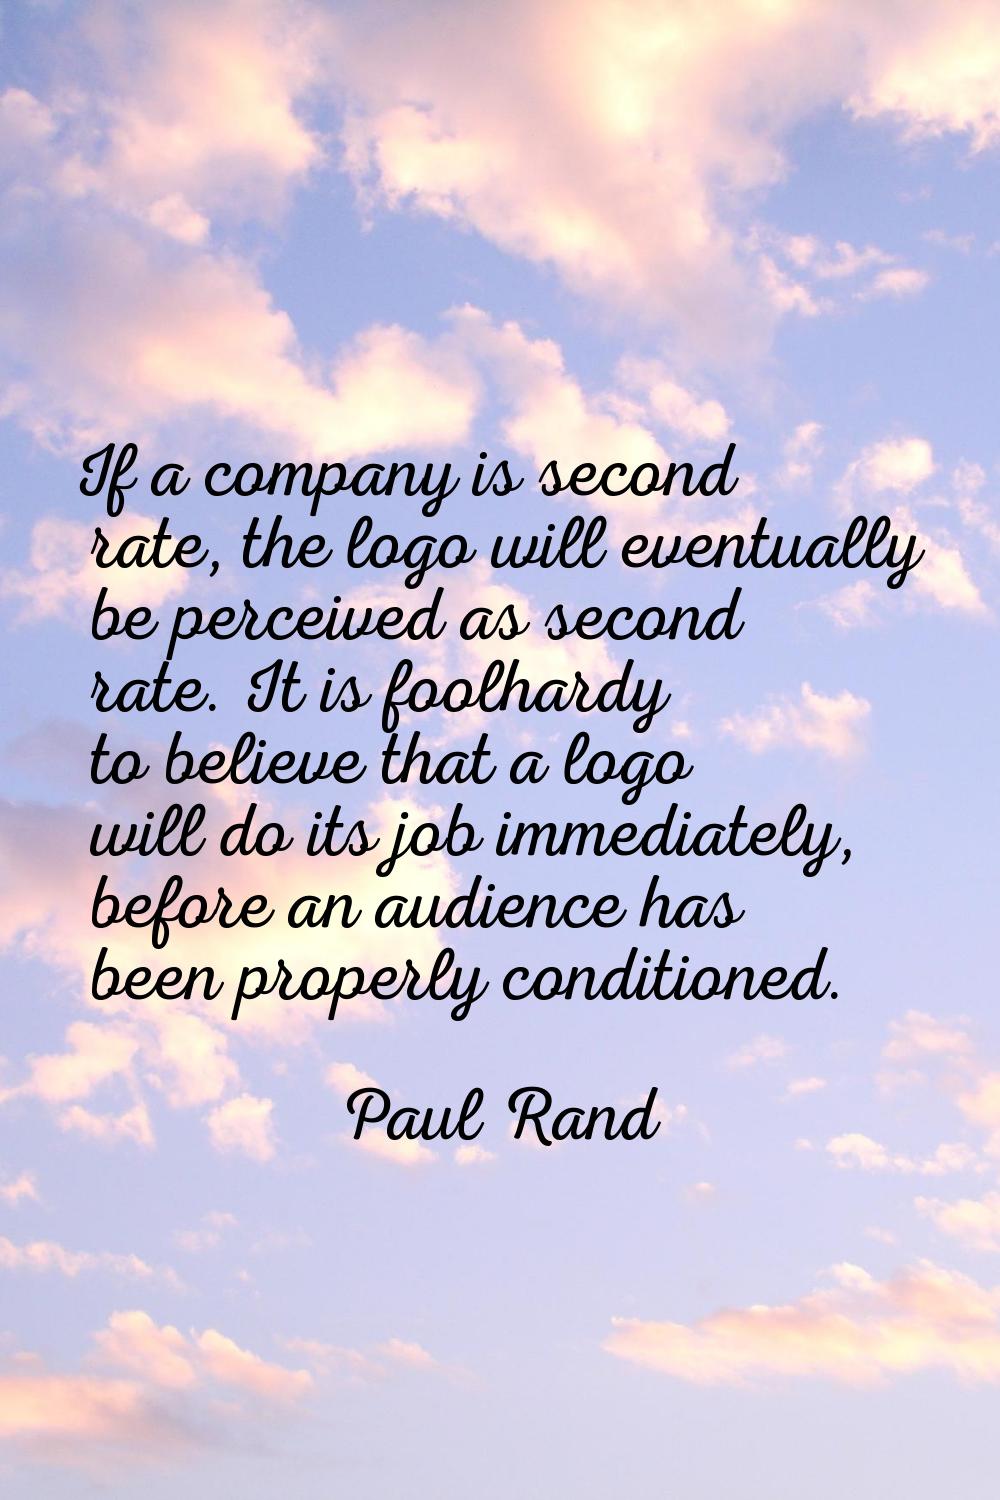 If a company is second rate, the logo will eventually be perceived as second rate. It is foolhardy 